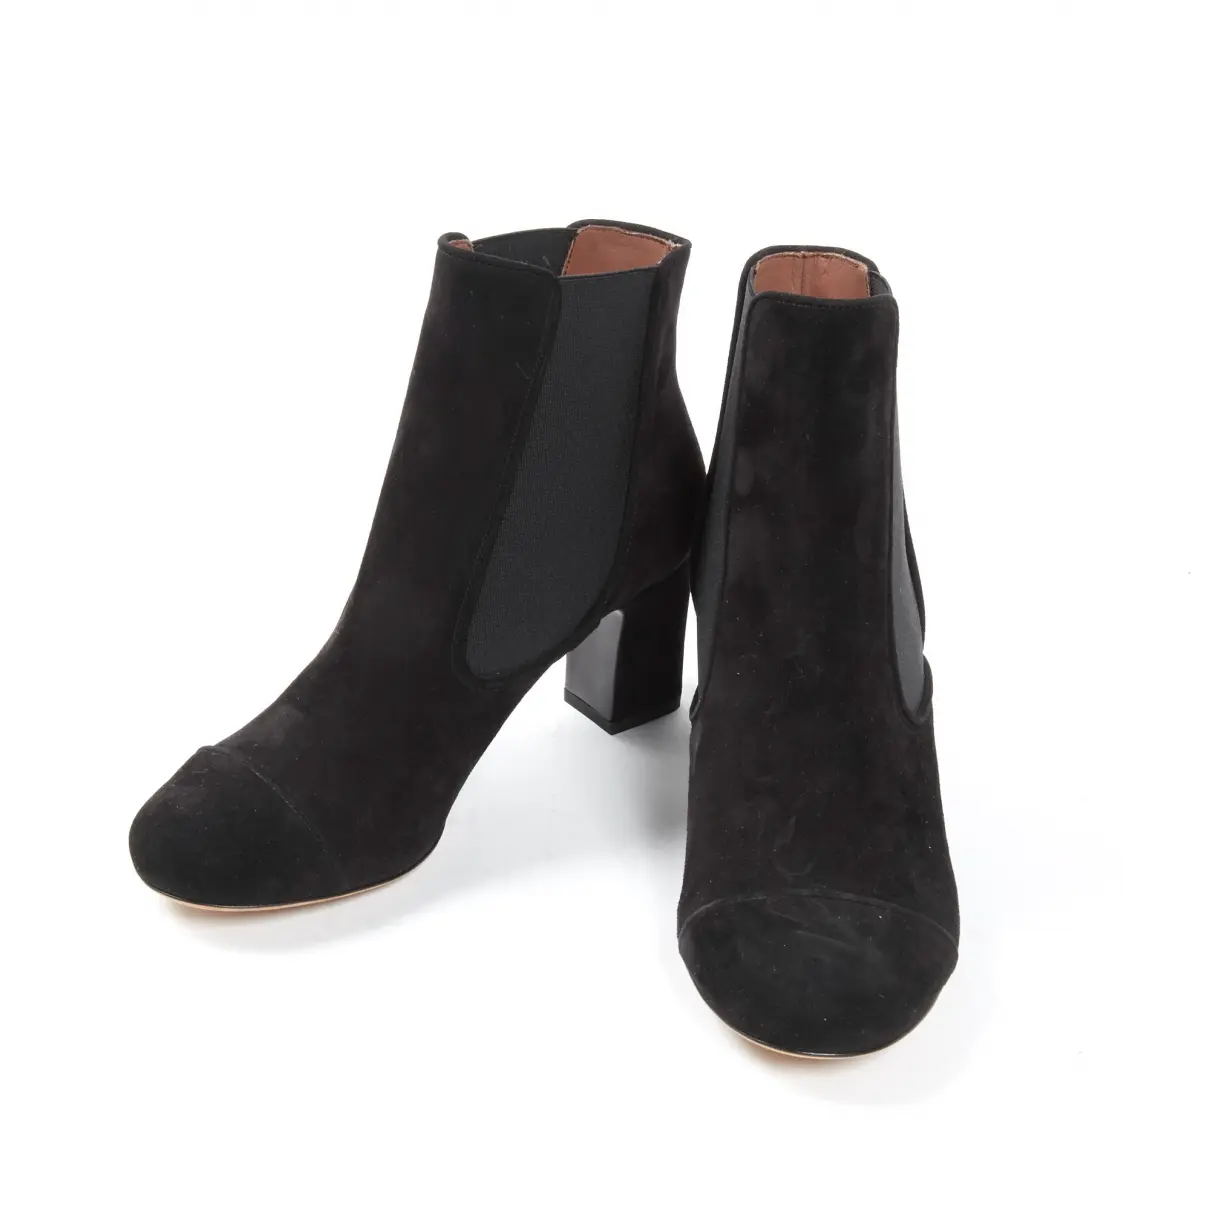 Tabitha Simmons Ankle boots for sale